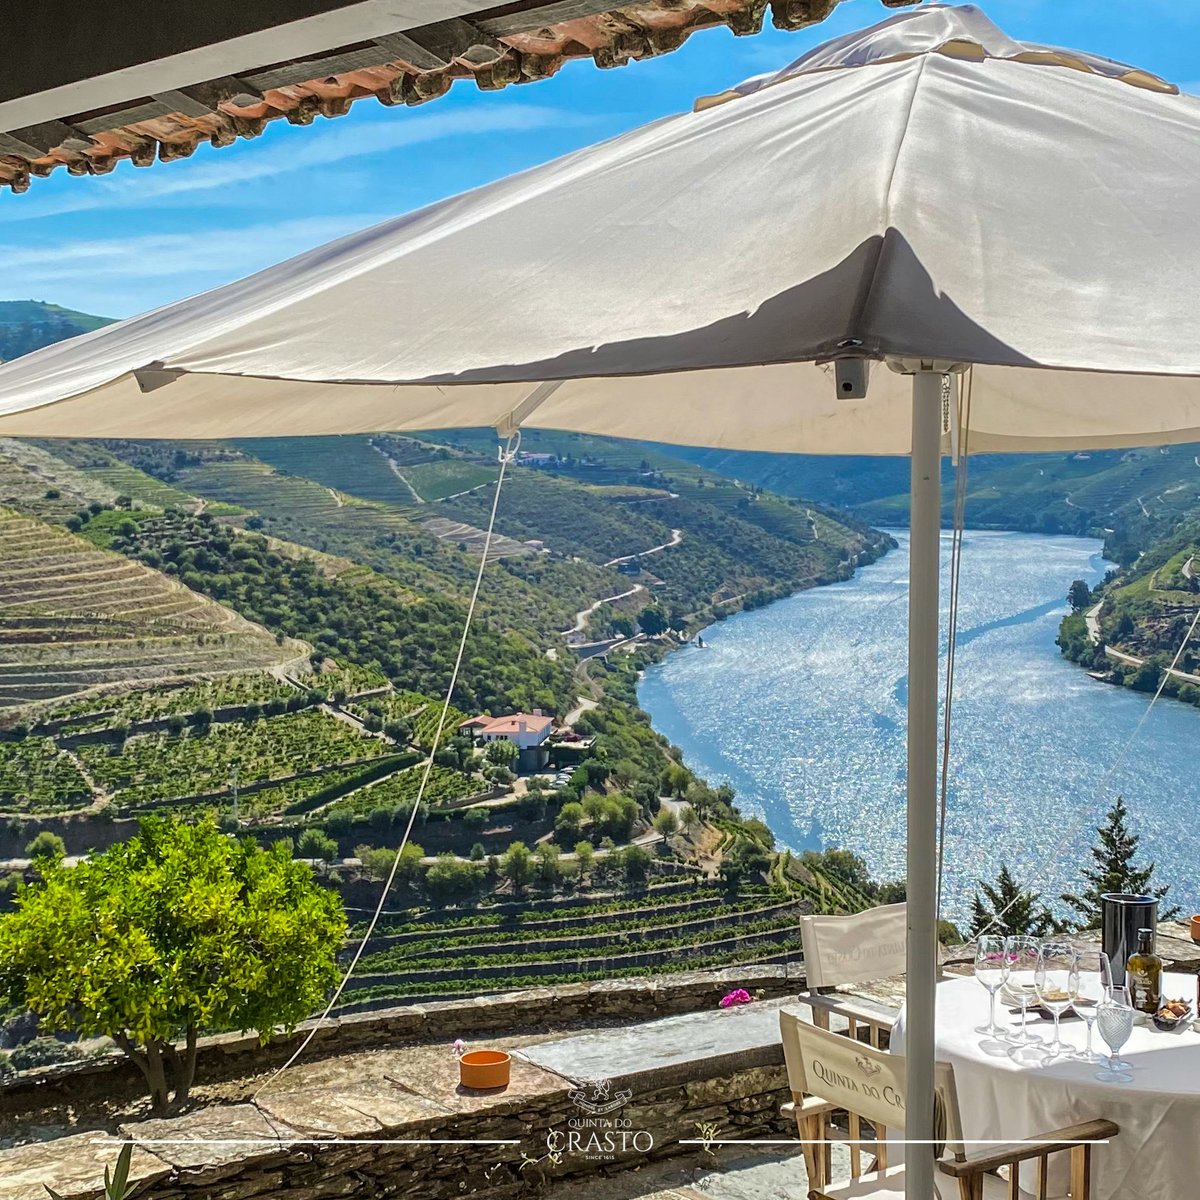 Five-wine tasting from Quinta do Crasto with that view over the river and the #Douro Valley. 🍷🙌🏼✨
👉🏼 To make a reservation or to obtain more information, please contact our #WineTourism Department via email at enoturismo@quintadocrasto.pt. 😉
#Travel #DouroWines #Wine #Wines